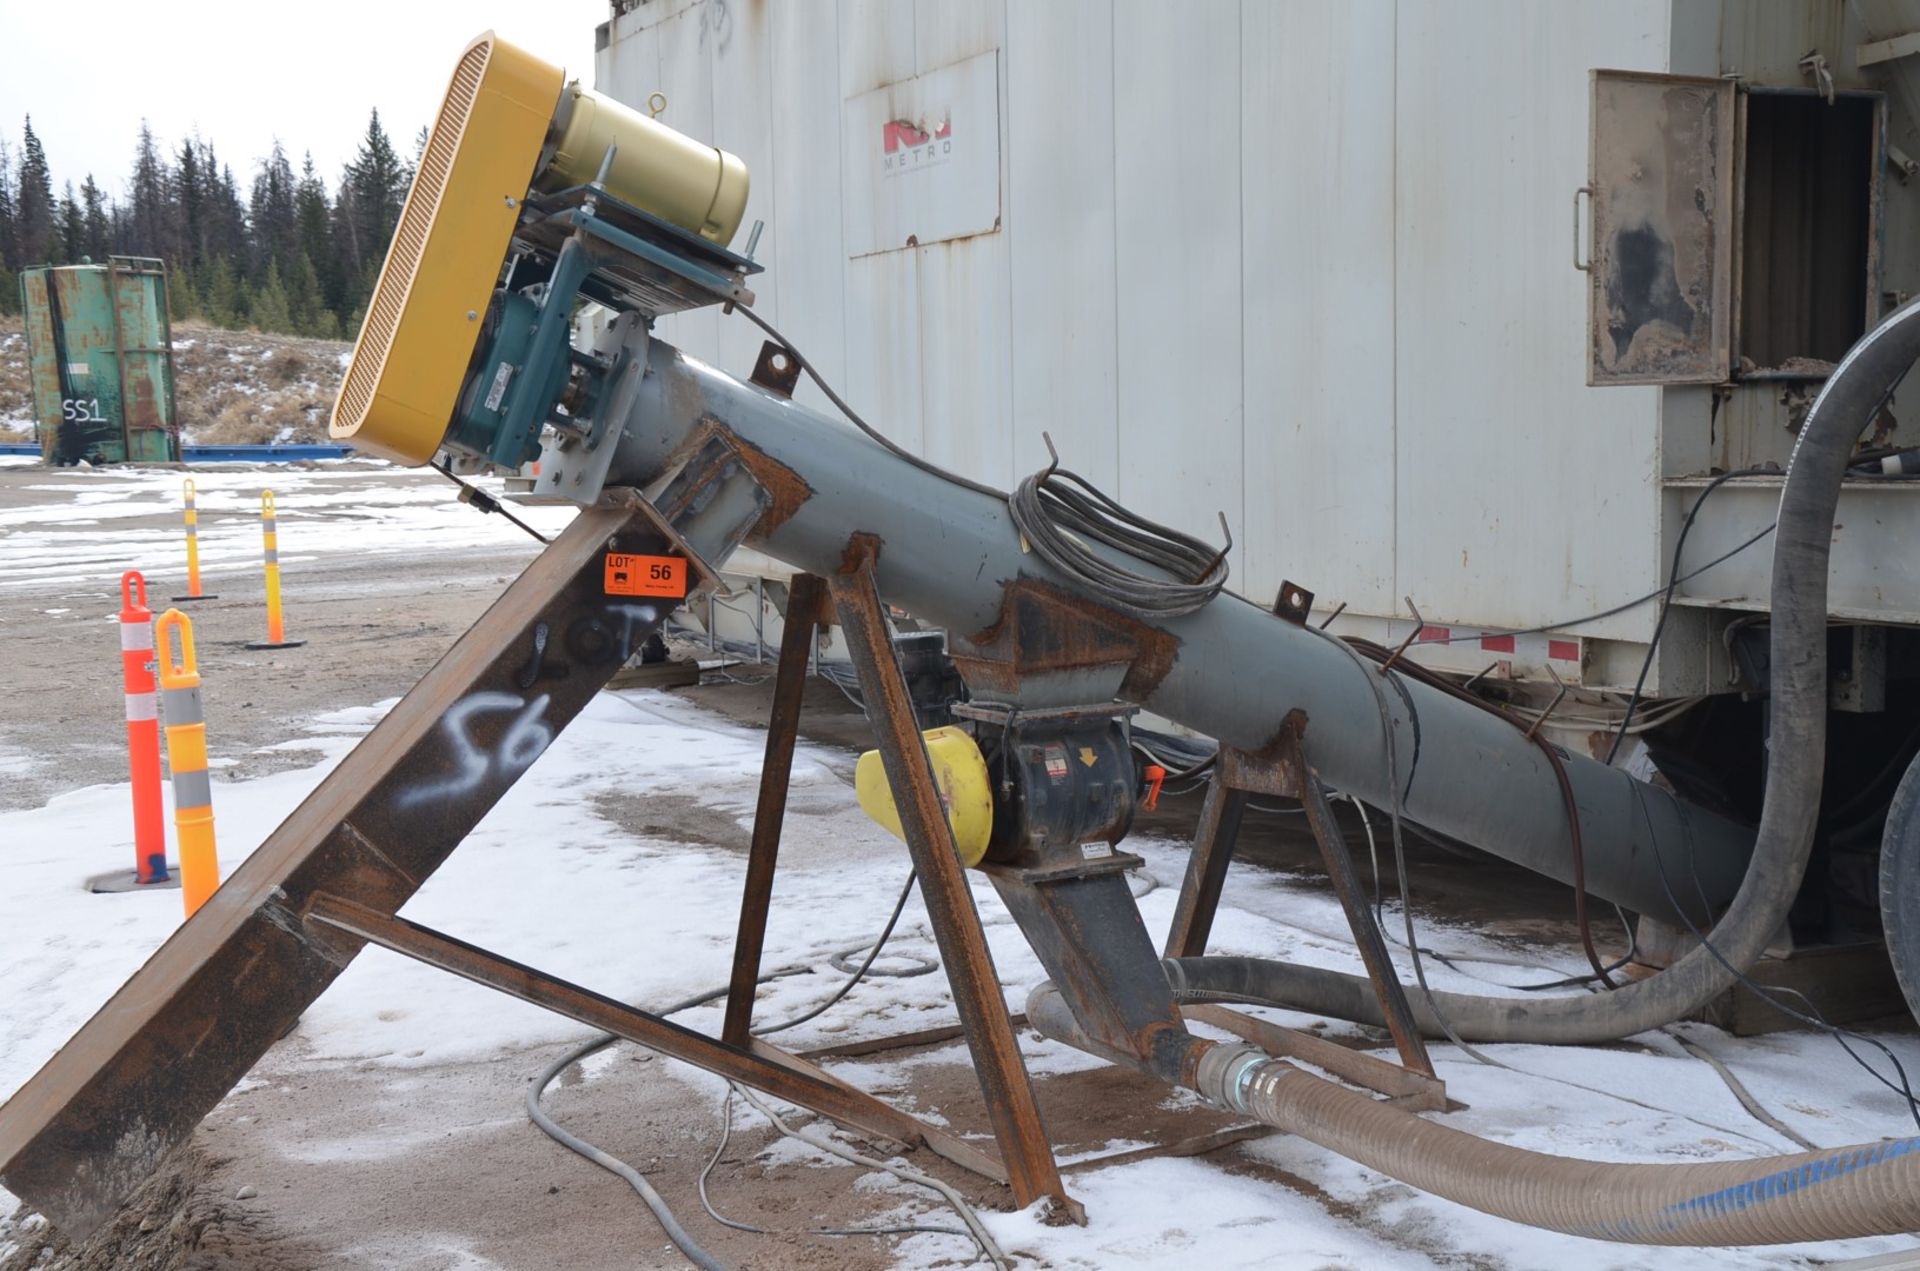 MAGNUM 12" DIA. X 10' INCLINE POWERED AUGER CONVEYOR WITH 10HP DRIVE MOTOR, MAGNUM ROTARY FEEDER,